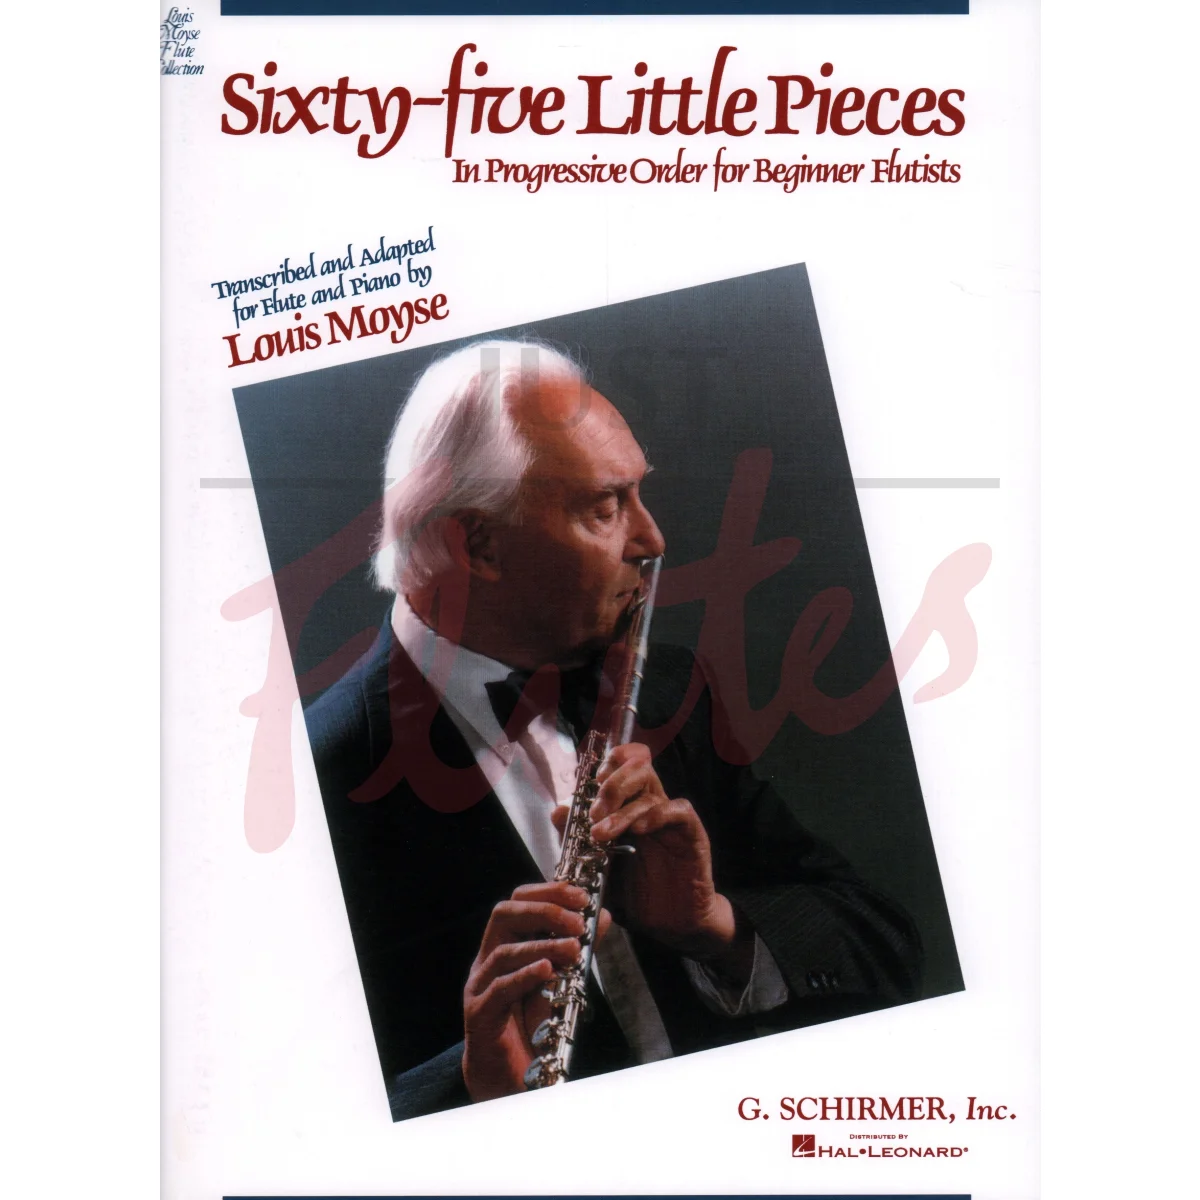 Sixty Five Little Pieces in Progressive Order for Beginner Flutists with Piano Accompaniment